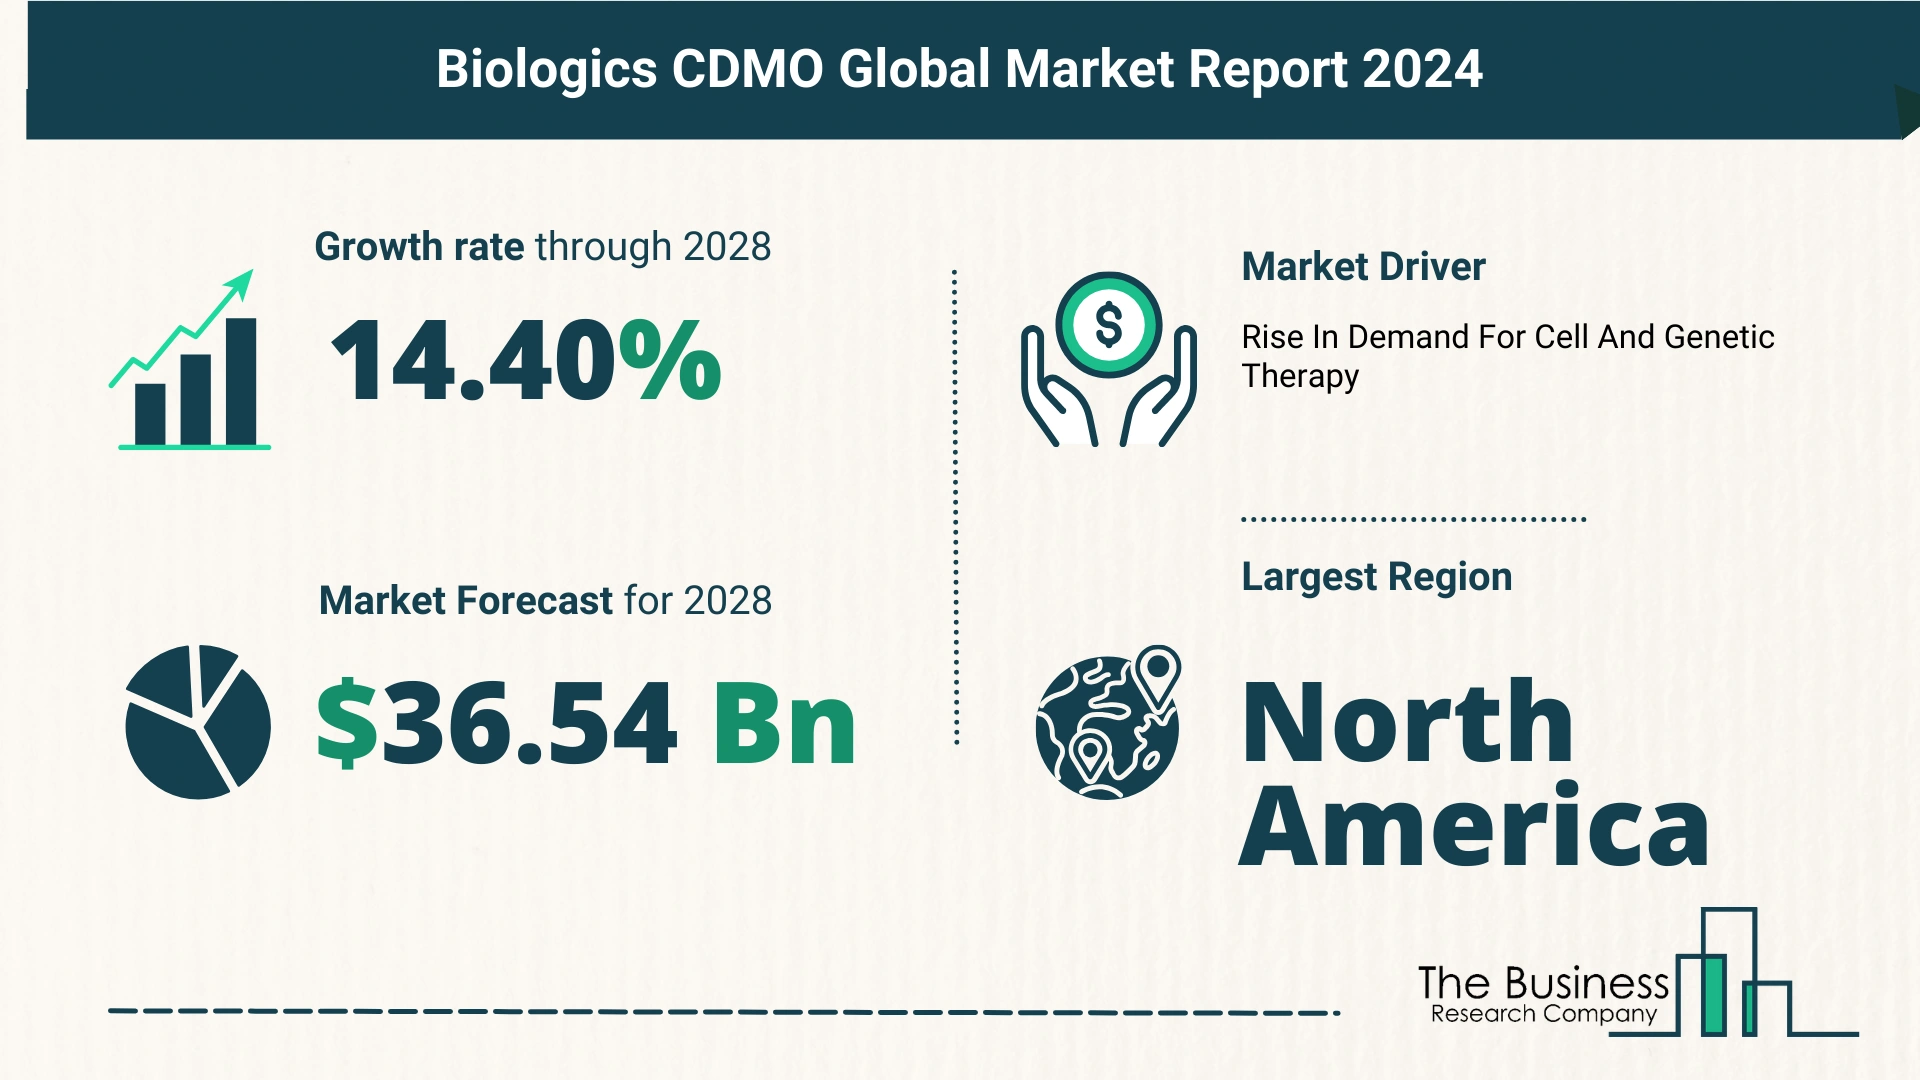 How Is The Biologics CDMO Market Expected To Grow Through 2024-2033